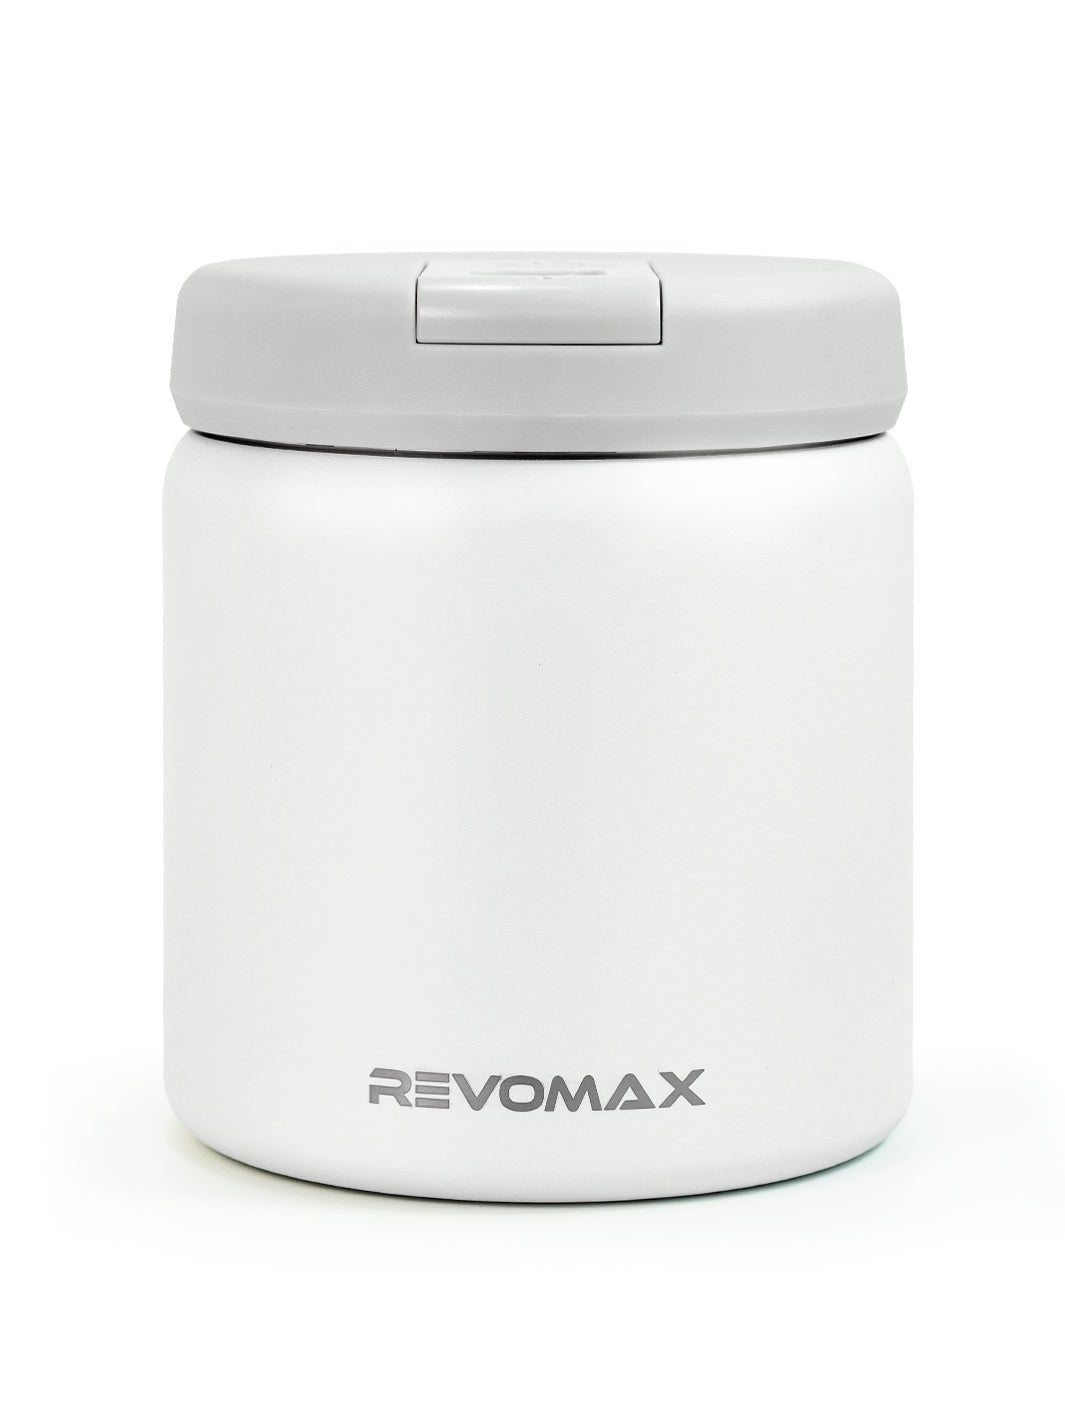  RevoMax Twist-free Insulated Food Jar, Thermos For Hot Food,  Vacuum Insulated Stainless Steel Lunch Containers With Wide Mouth, Leak  Proof Soup Thermal Lunch Box, 20oz : Home & Kitchen